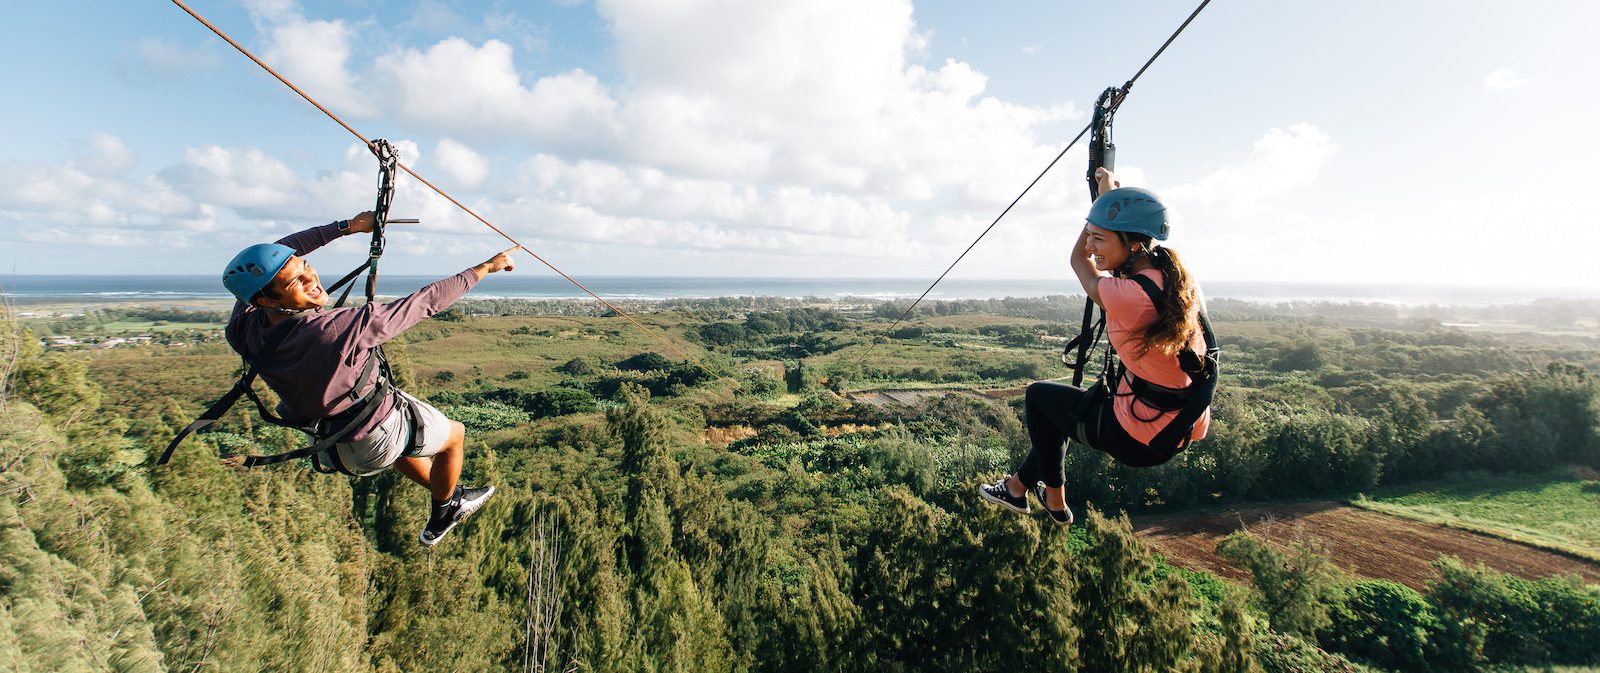 4 Things Visitors Love When They Zipline in Hawaii at CLIMB Works